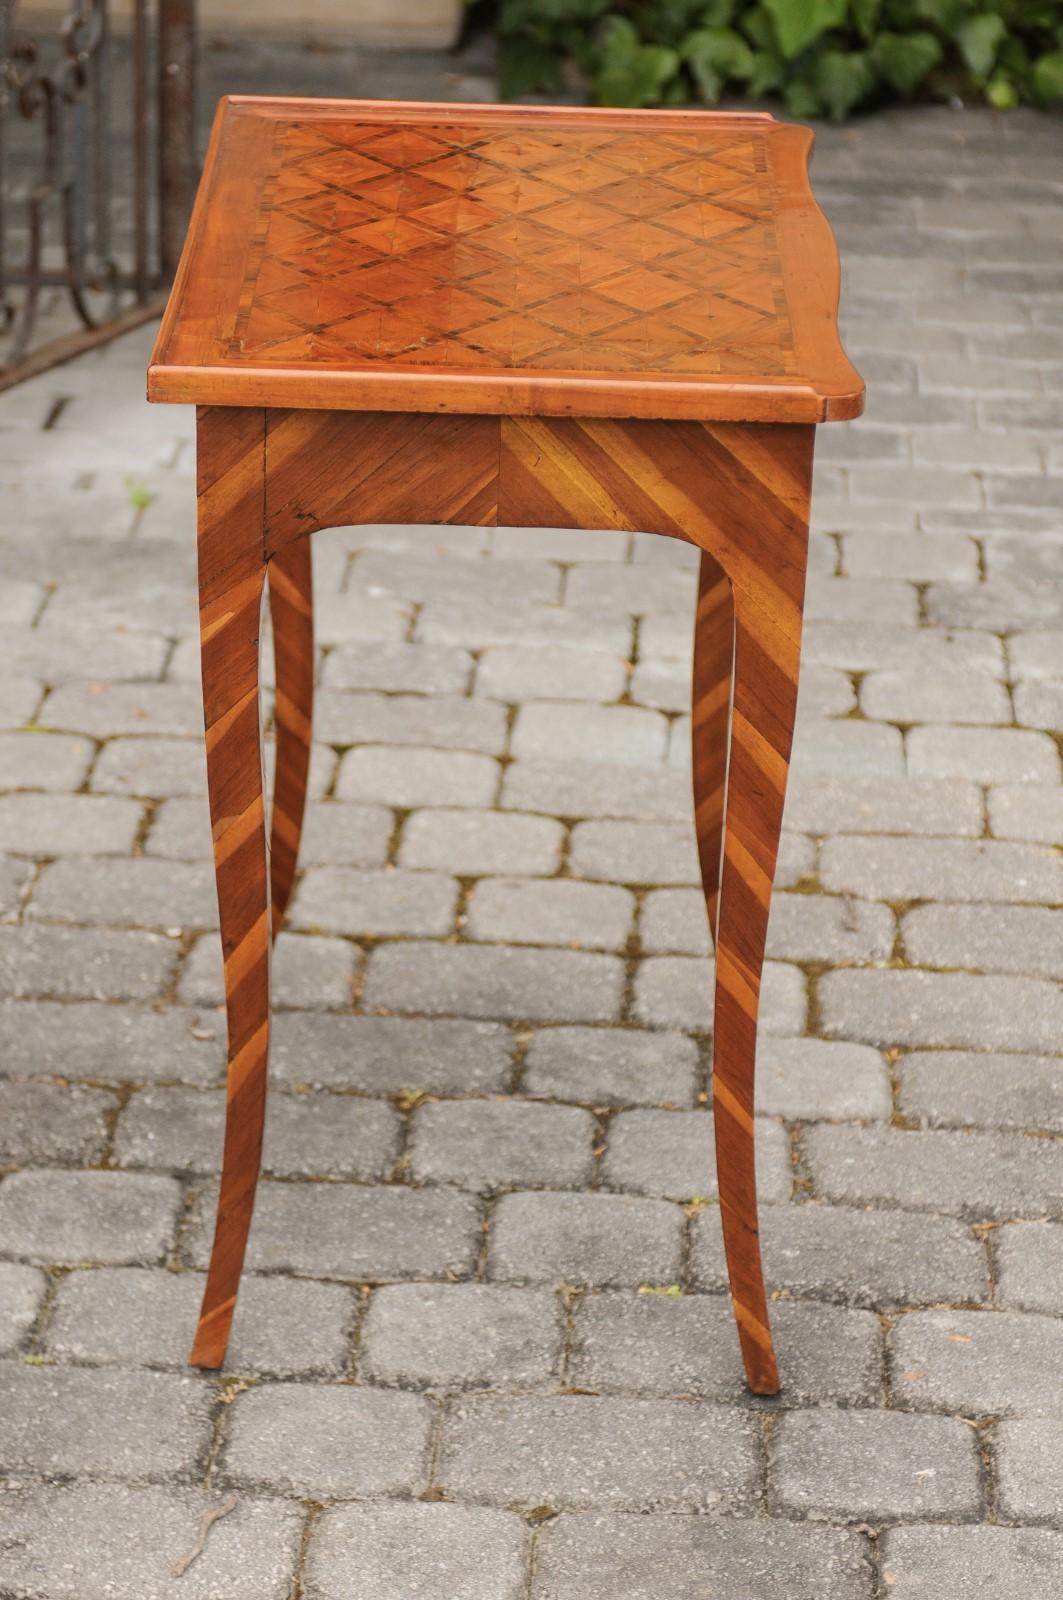 Italian 1820s Walnut Side Table with Marquetry Top, Inlaid Legs and Side Drawer For Sale 1